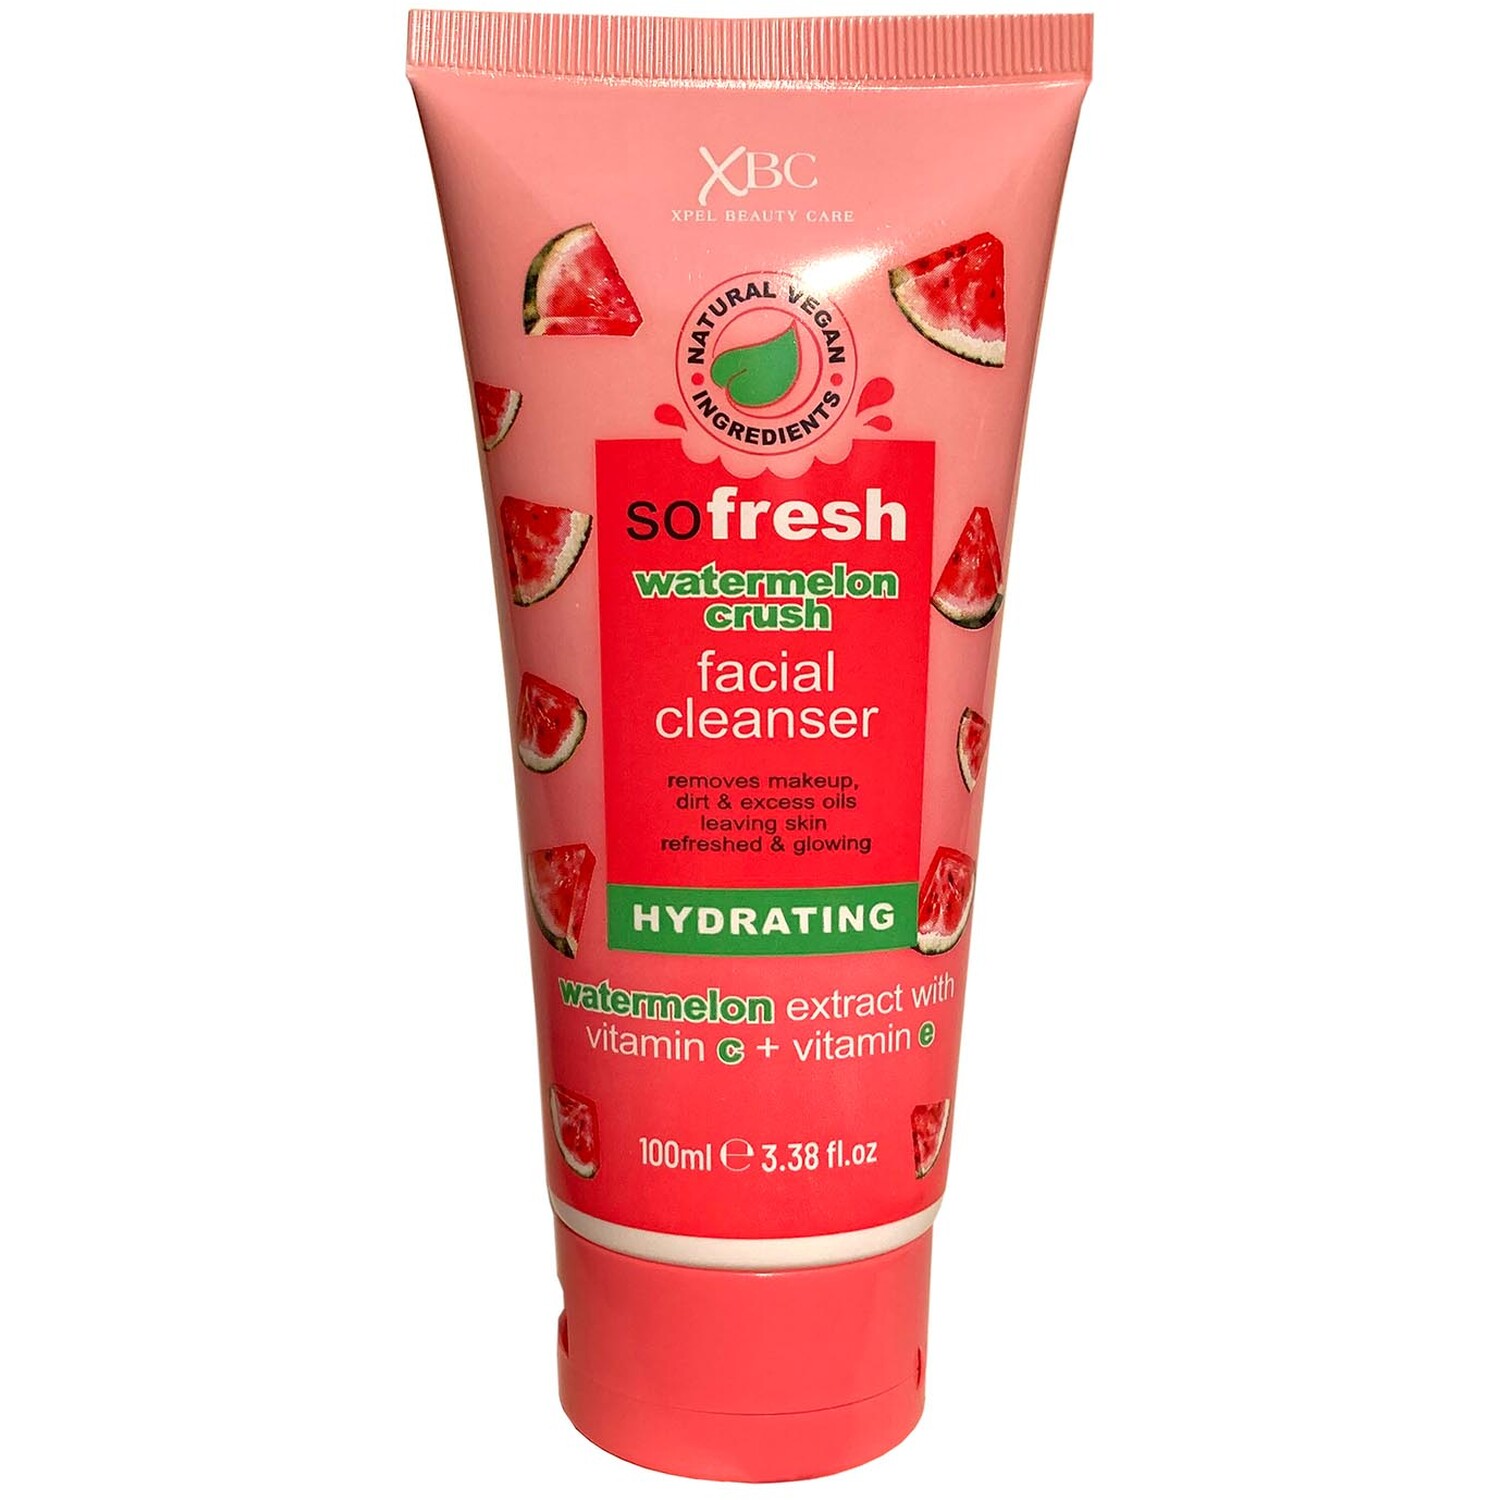 SoFresh Watermelon Crush Facial Cleanser - Red Image